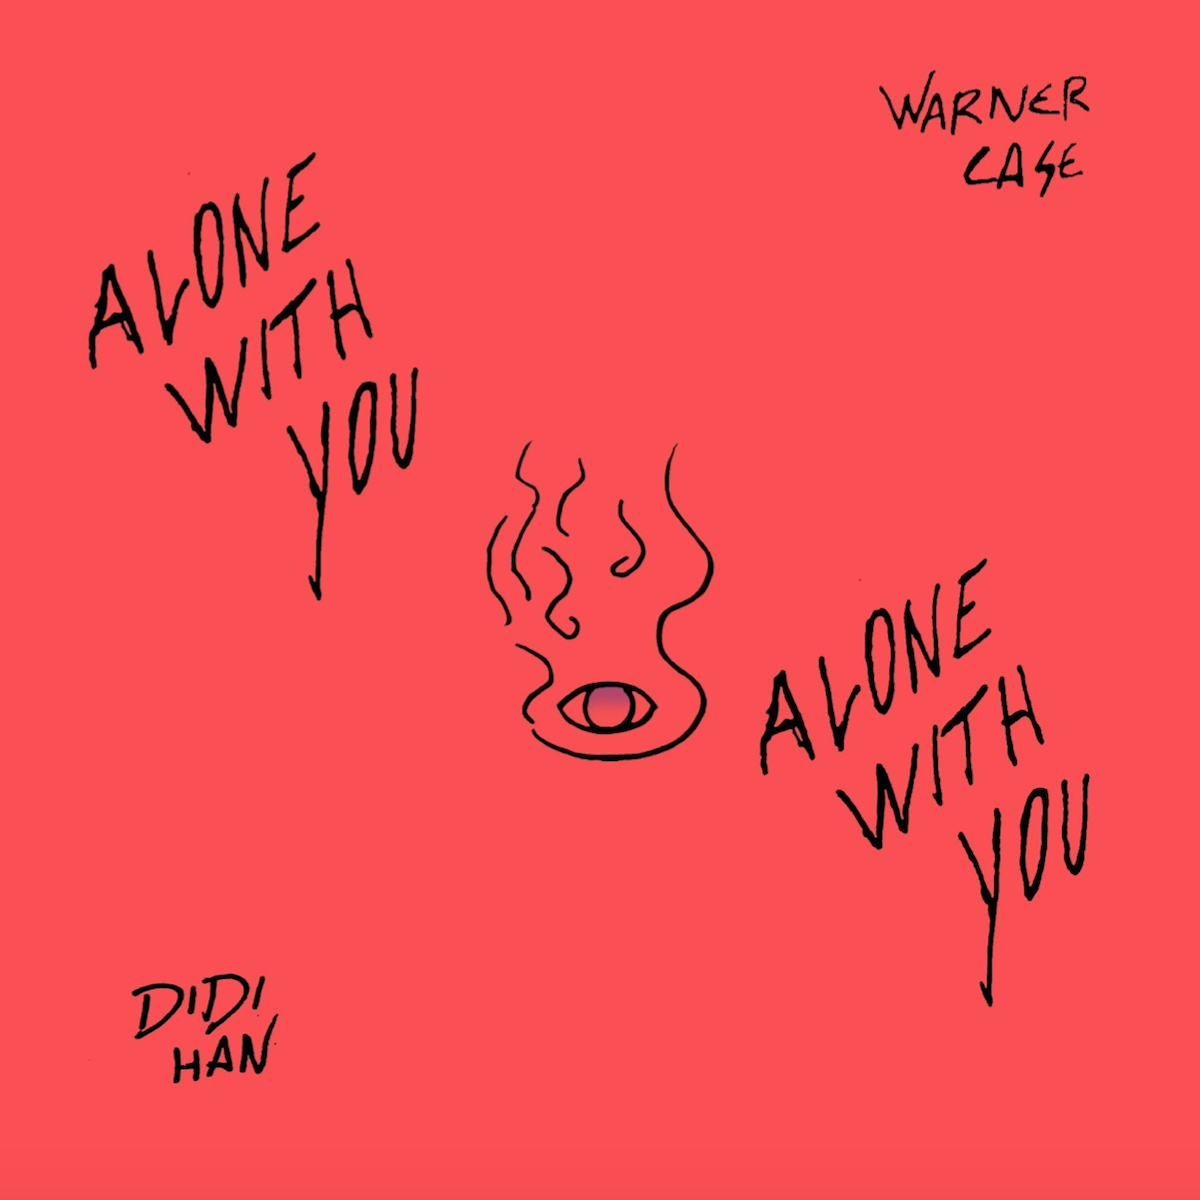 You are currently viewing Le new-yorkais warner case et la coréenne Didi Han cosignent un single « Alone With You » via Roche Musique